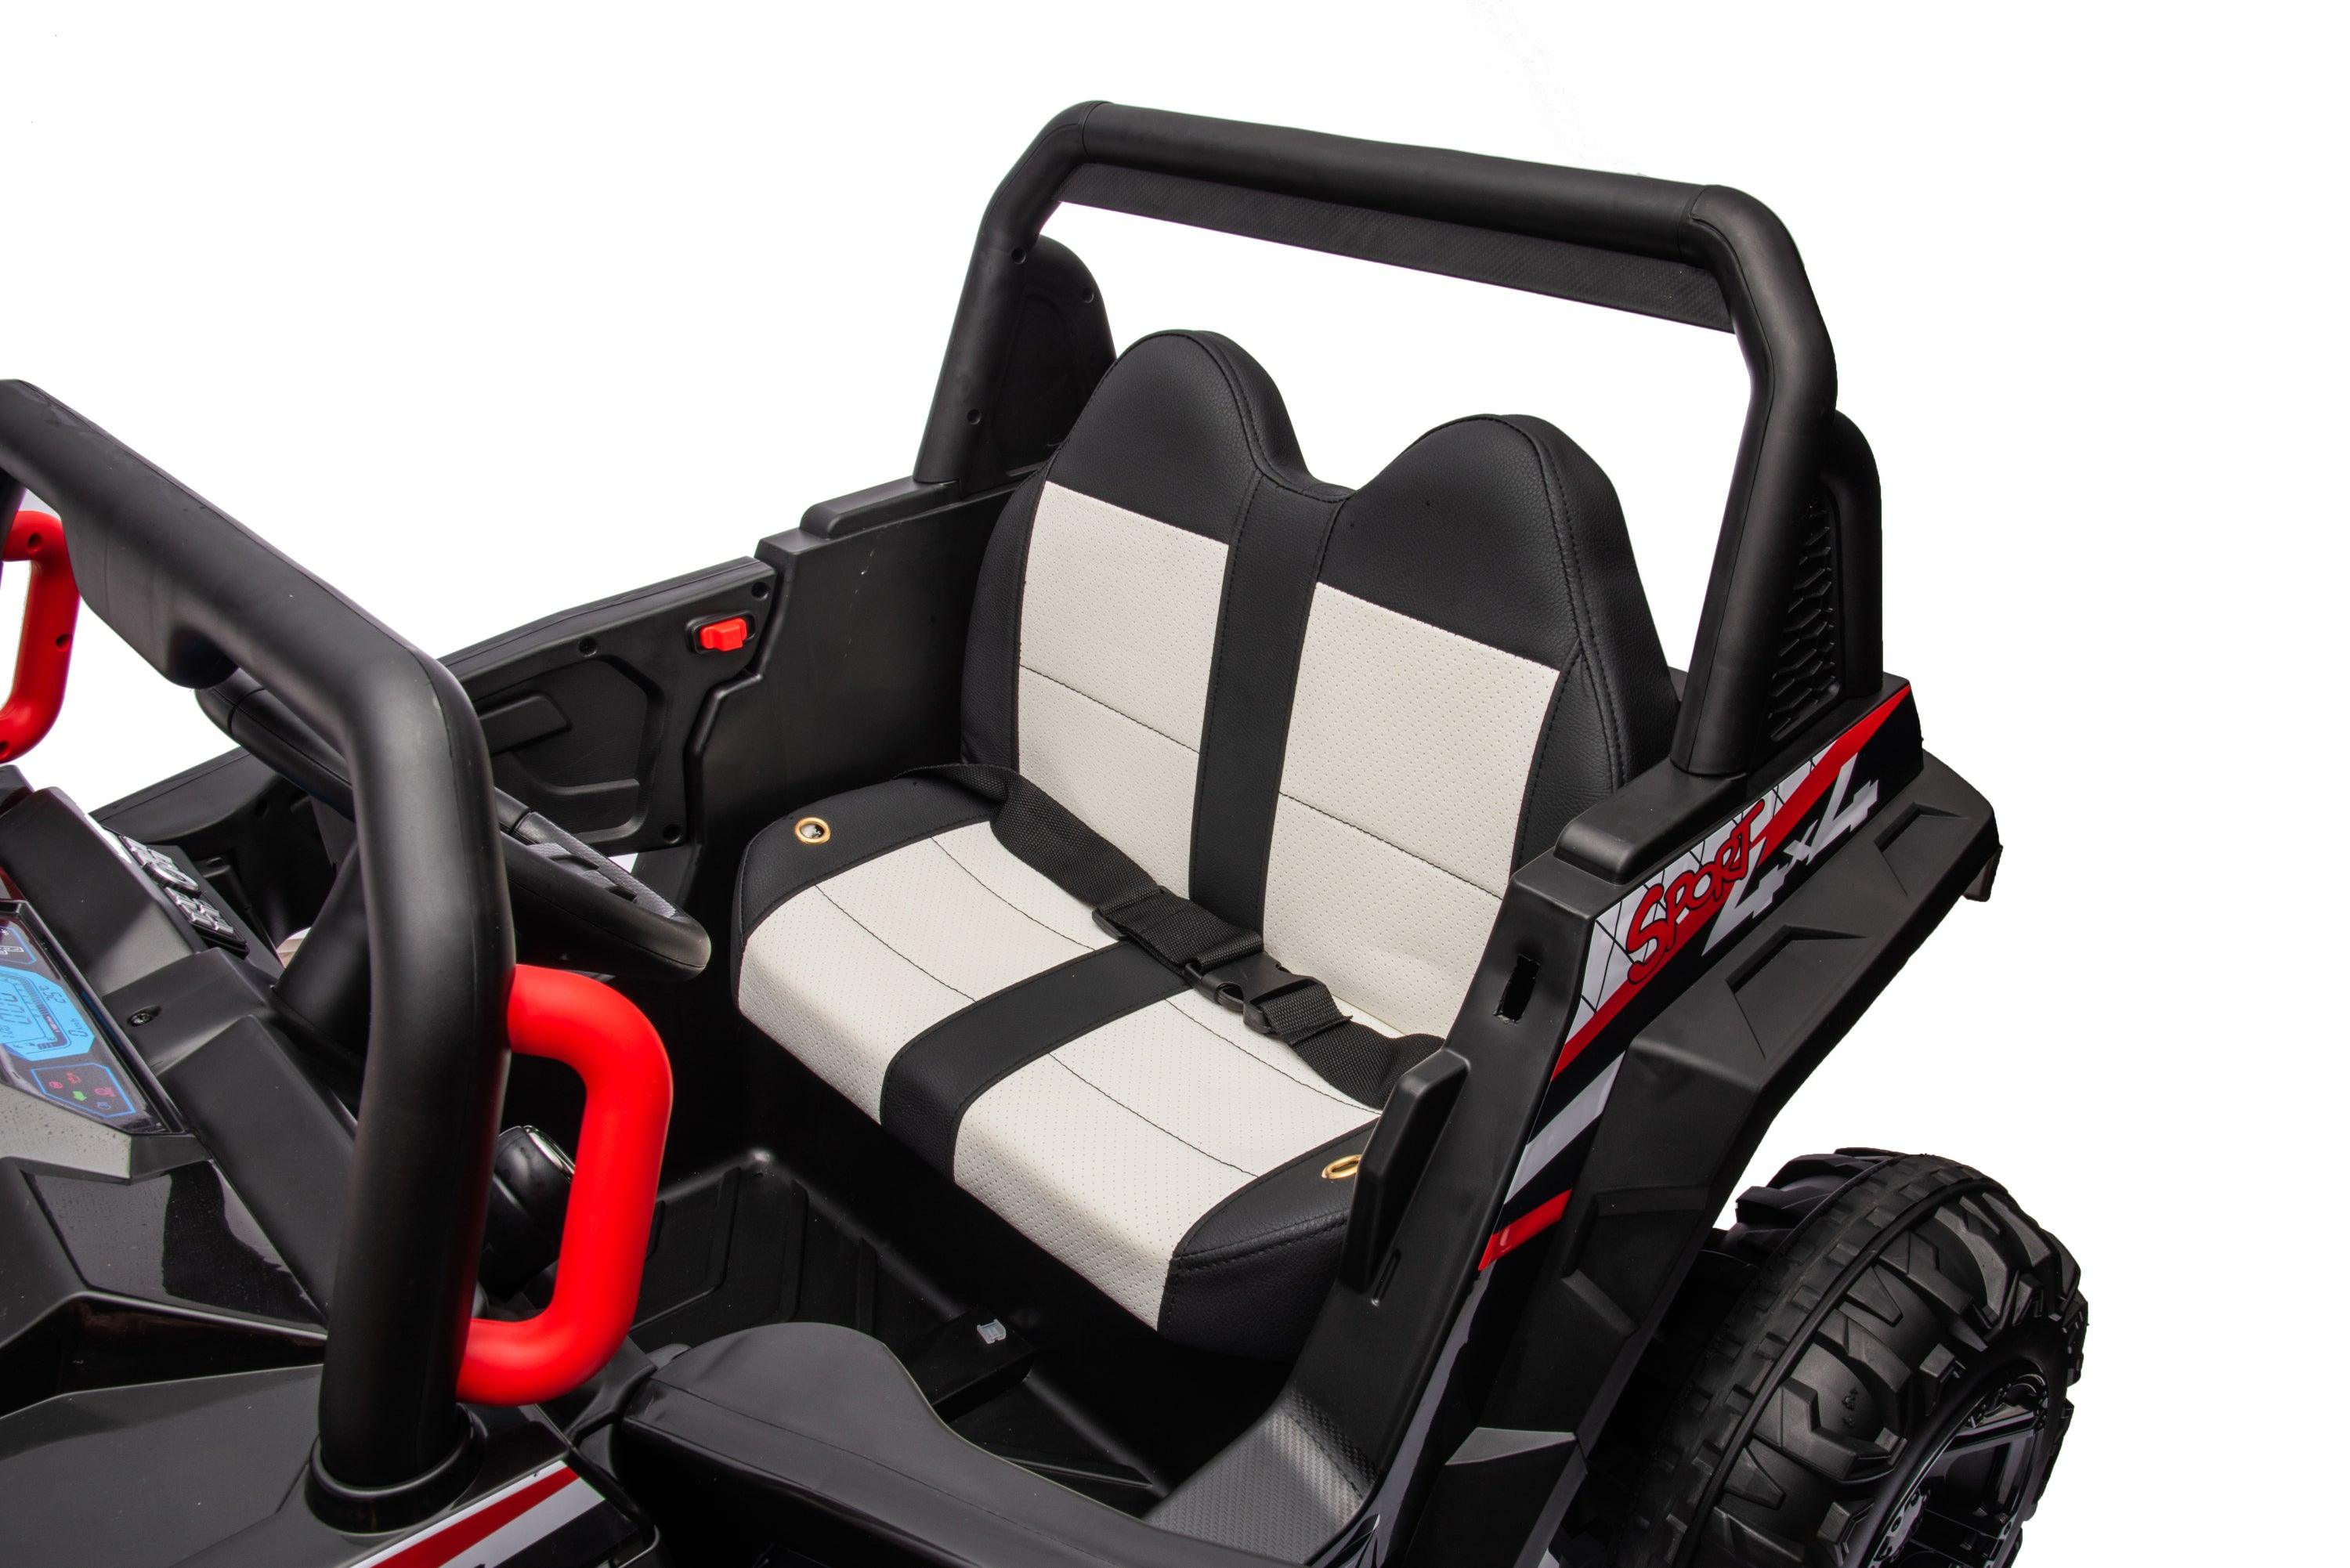 ???? 12V7Ax2 30W*4 Four-Wheel Drive Electric Ride On Open Car One Button Start, Forward & Backward, High & Low Speed, Music, Front Light, Power Display,  2.4G R/C, Seat Belt Four Wheel Absorber